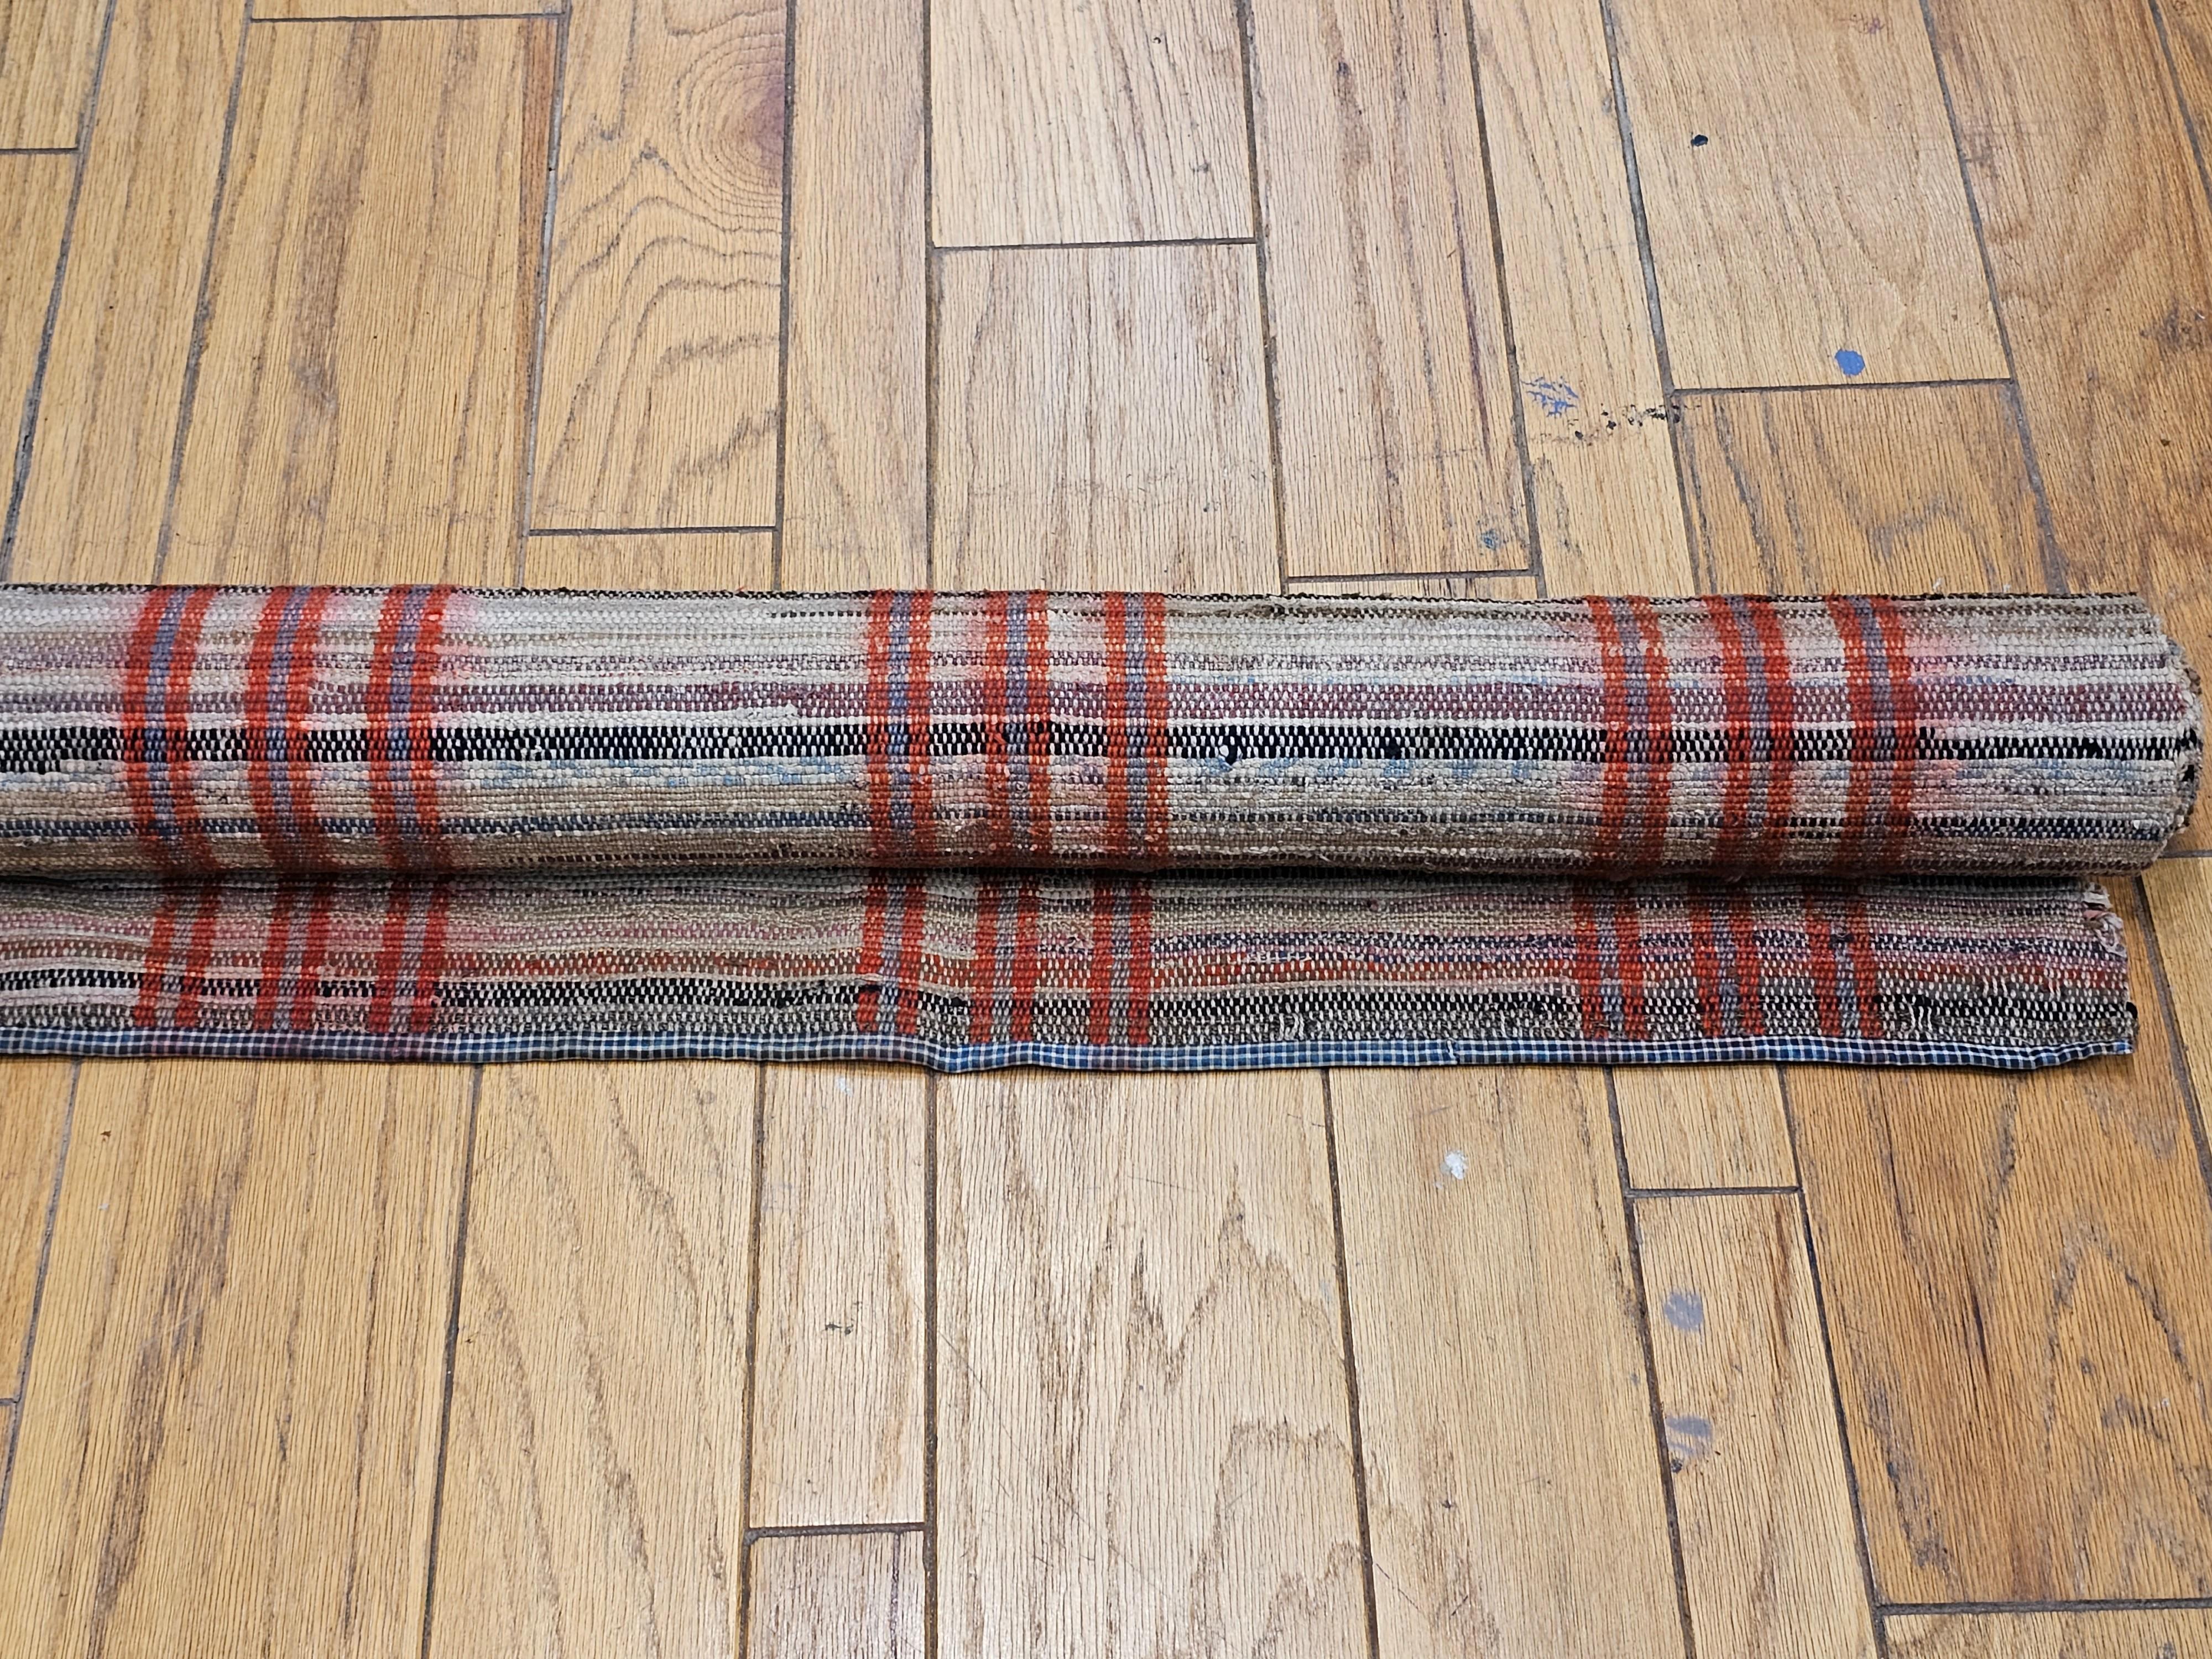 Vintage American Rag Runner in Tan with Stripe Pattern in Red, Pale Blue For Sale 6